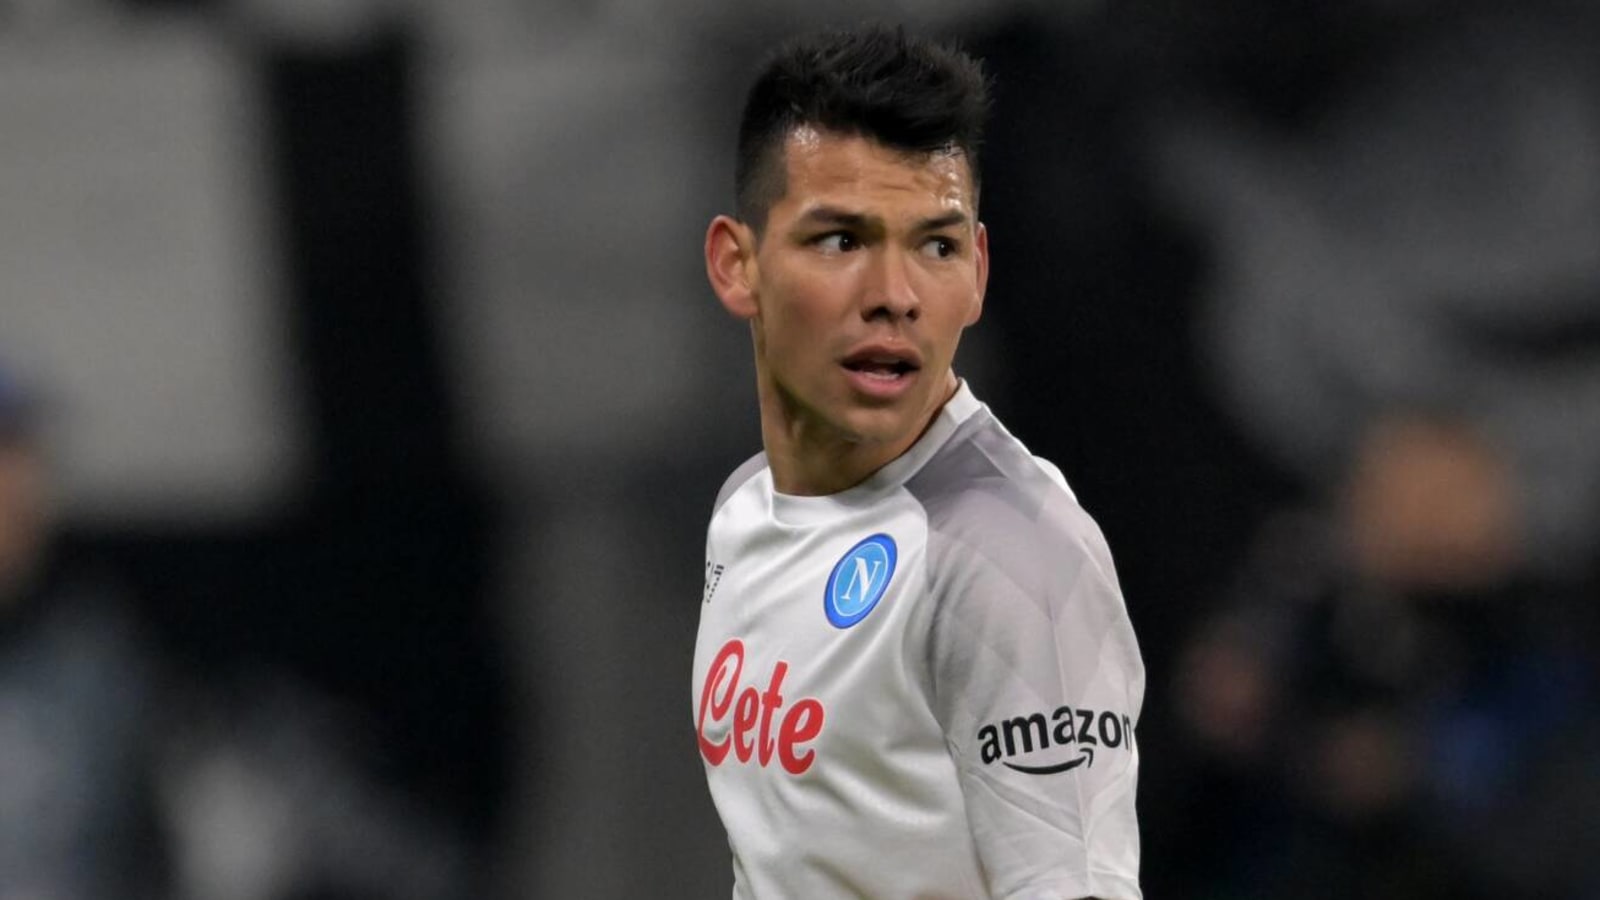 Chelsea offered Napoli winger who has one year left on his contract